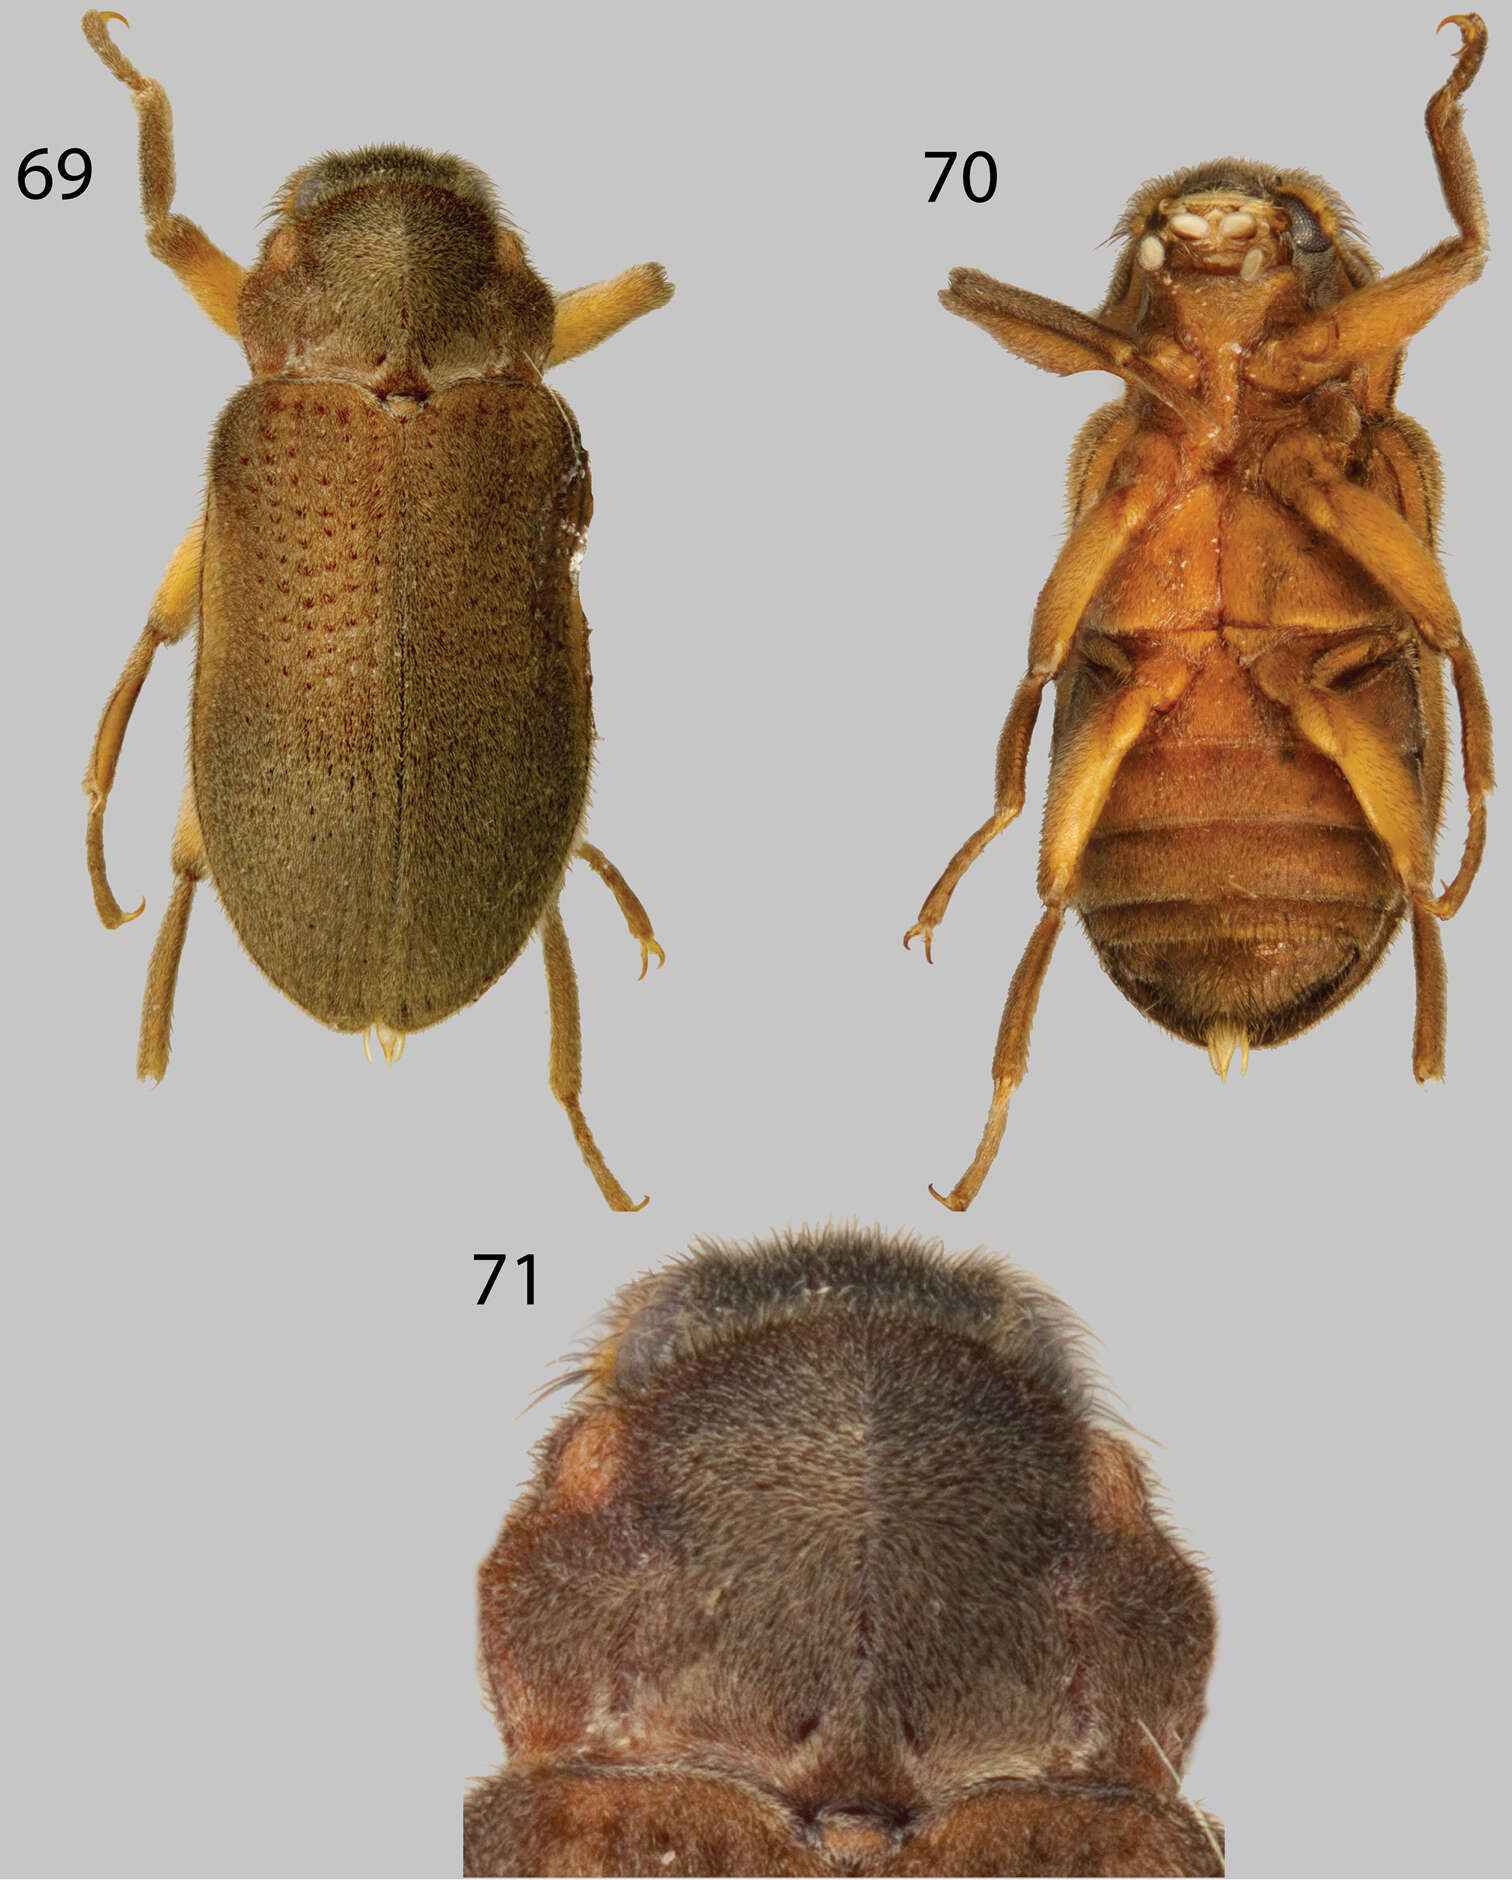 Image of Phanocerus congener Grouvelle 1898